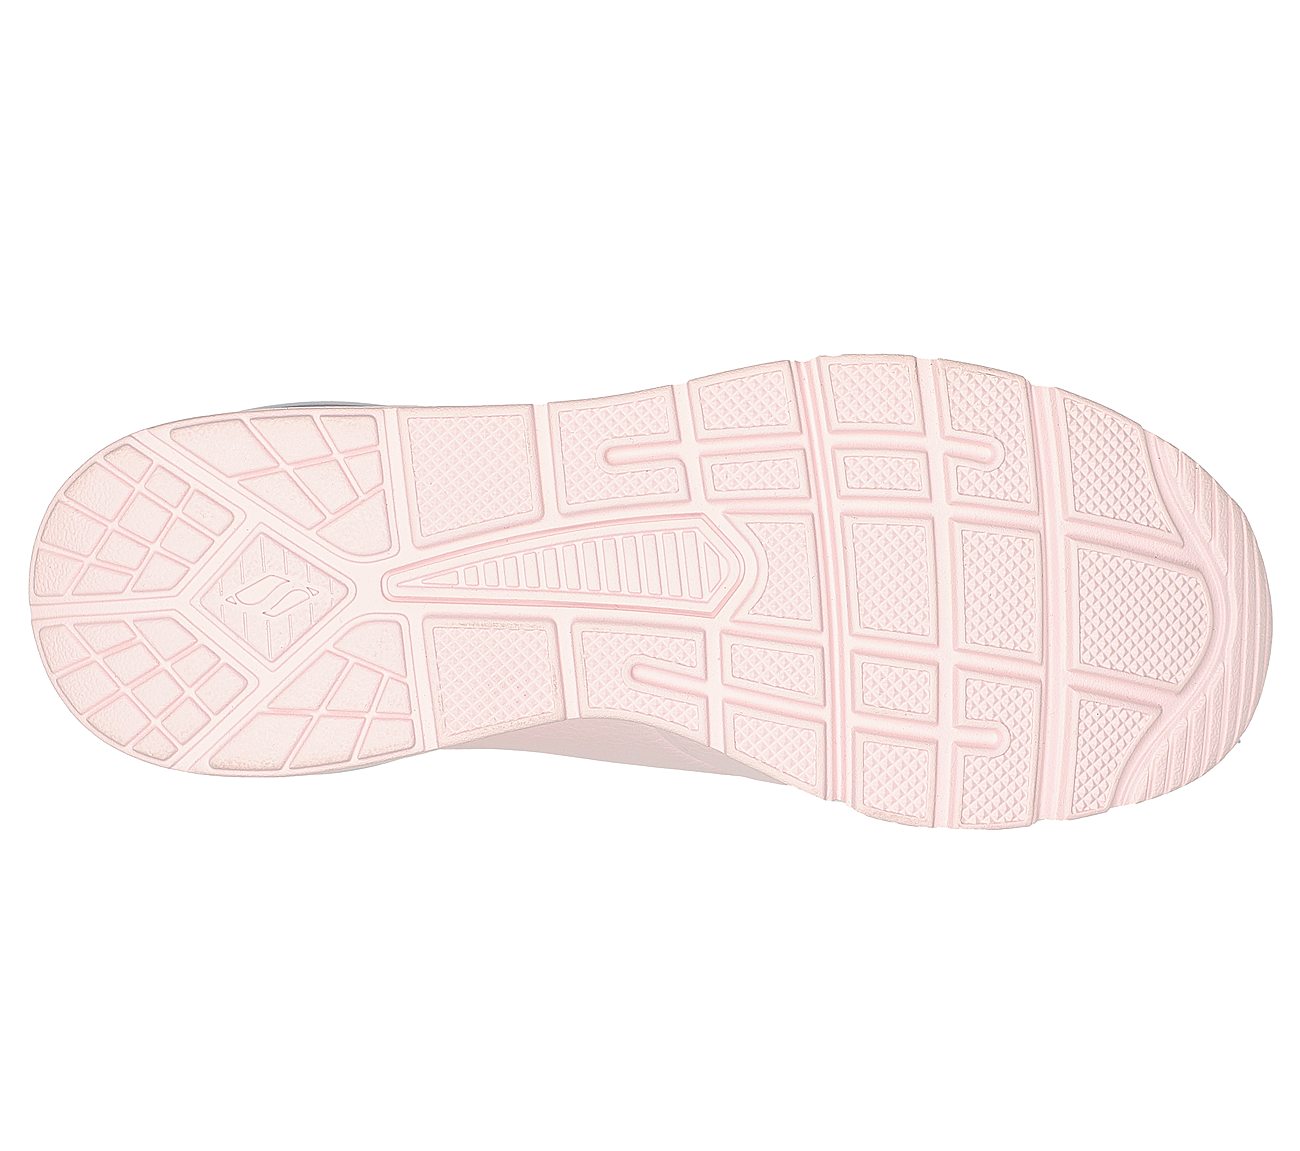 UNO 2 - PASTEL PLAYERS, LLLIGHT PINK Footwear Bottom View